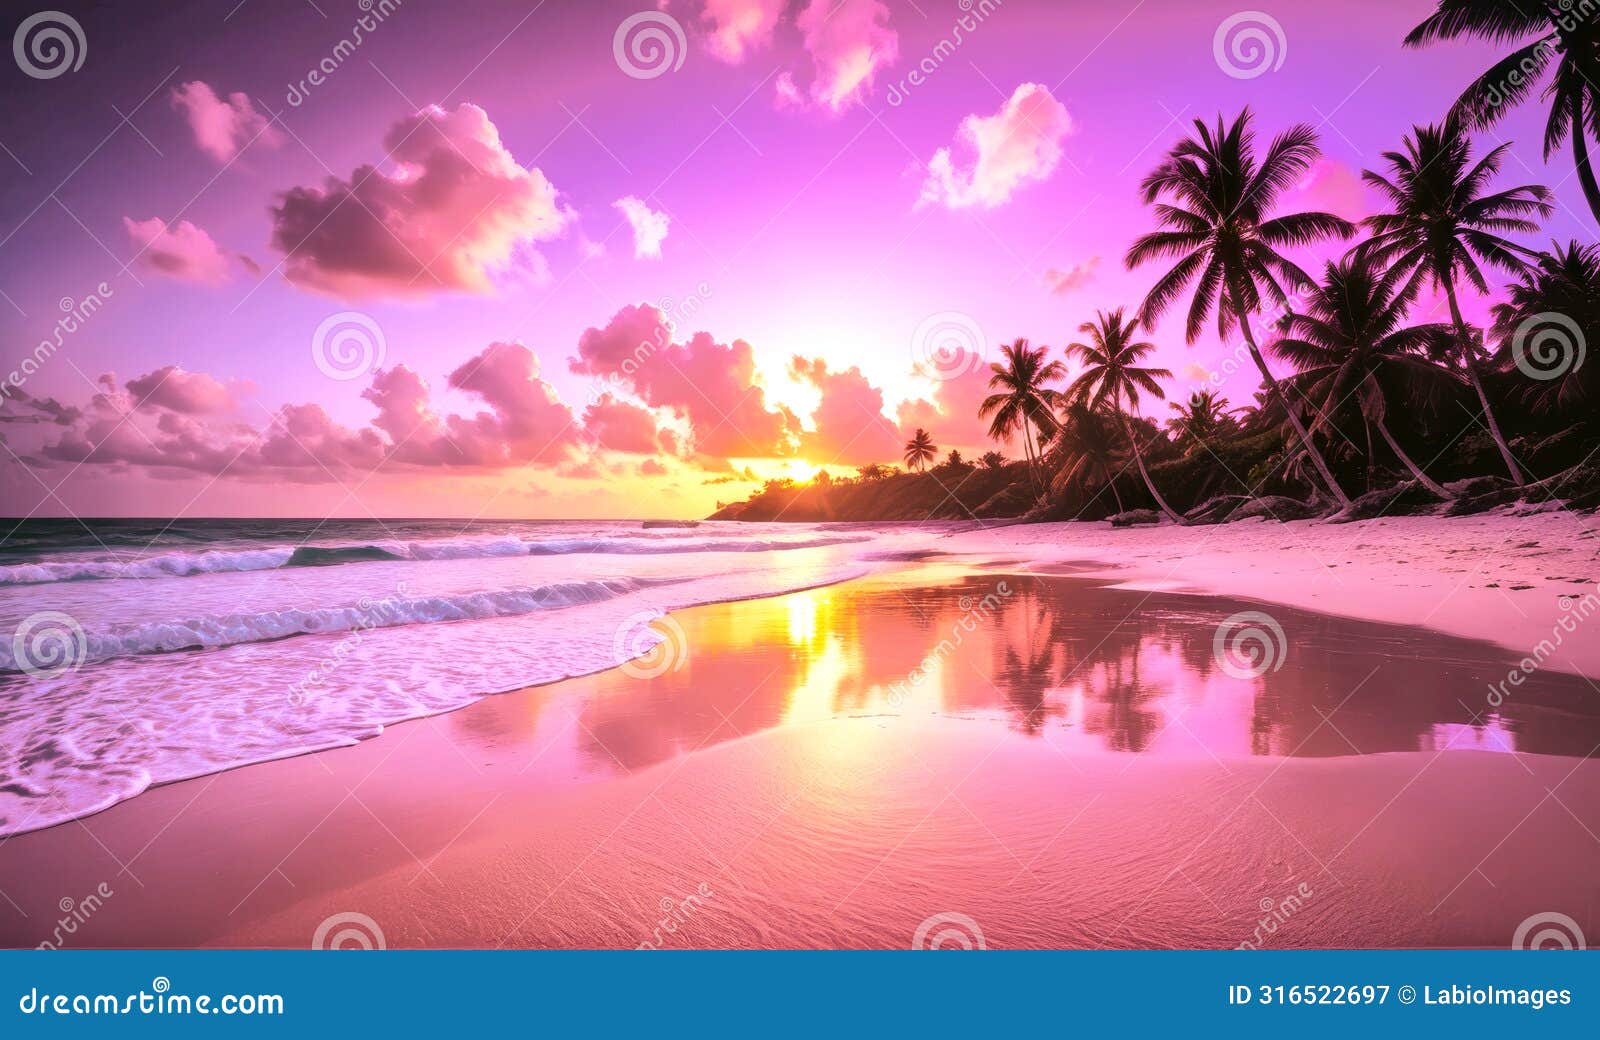  of sunset on a paradisiacal beach with coconut trees